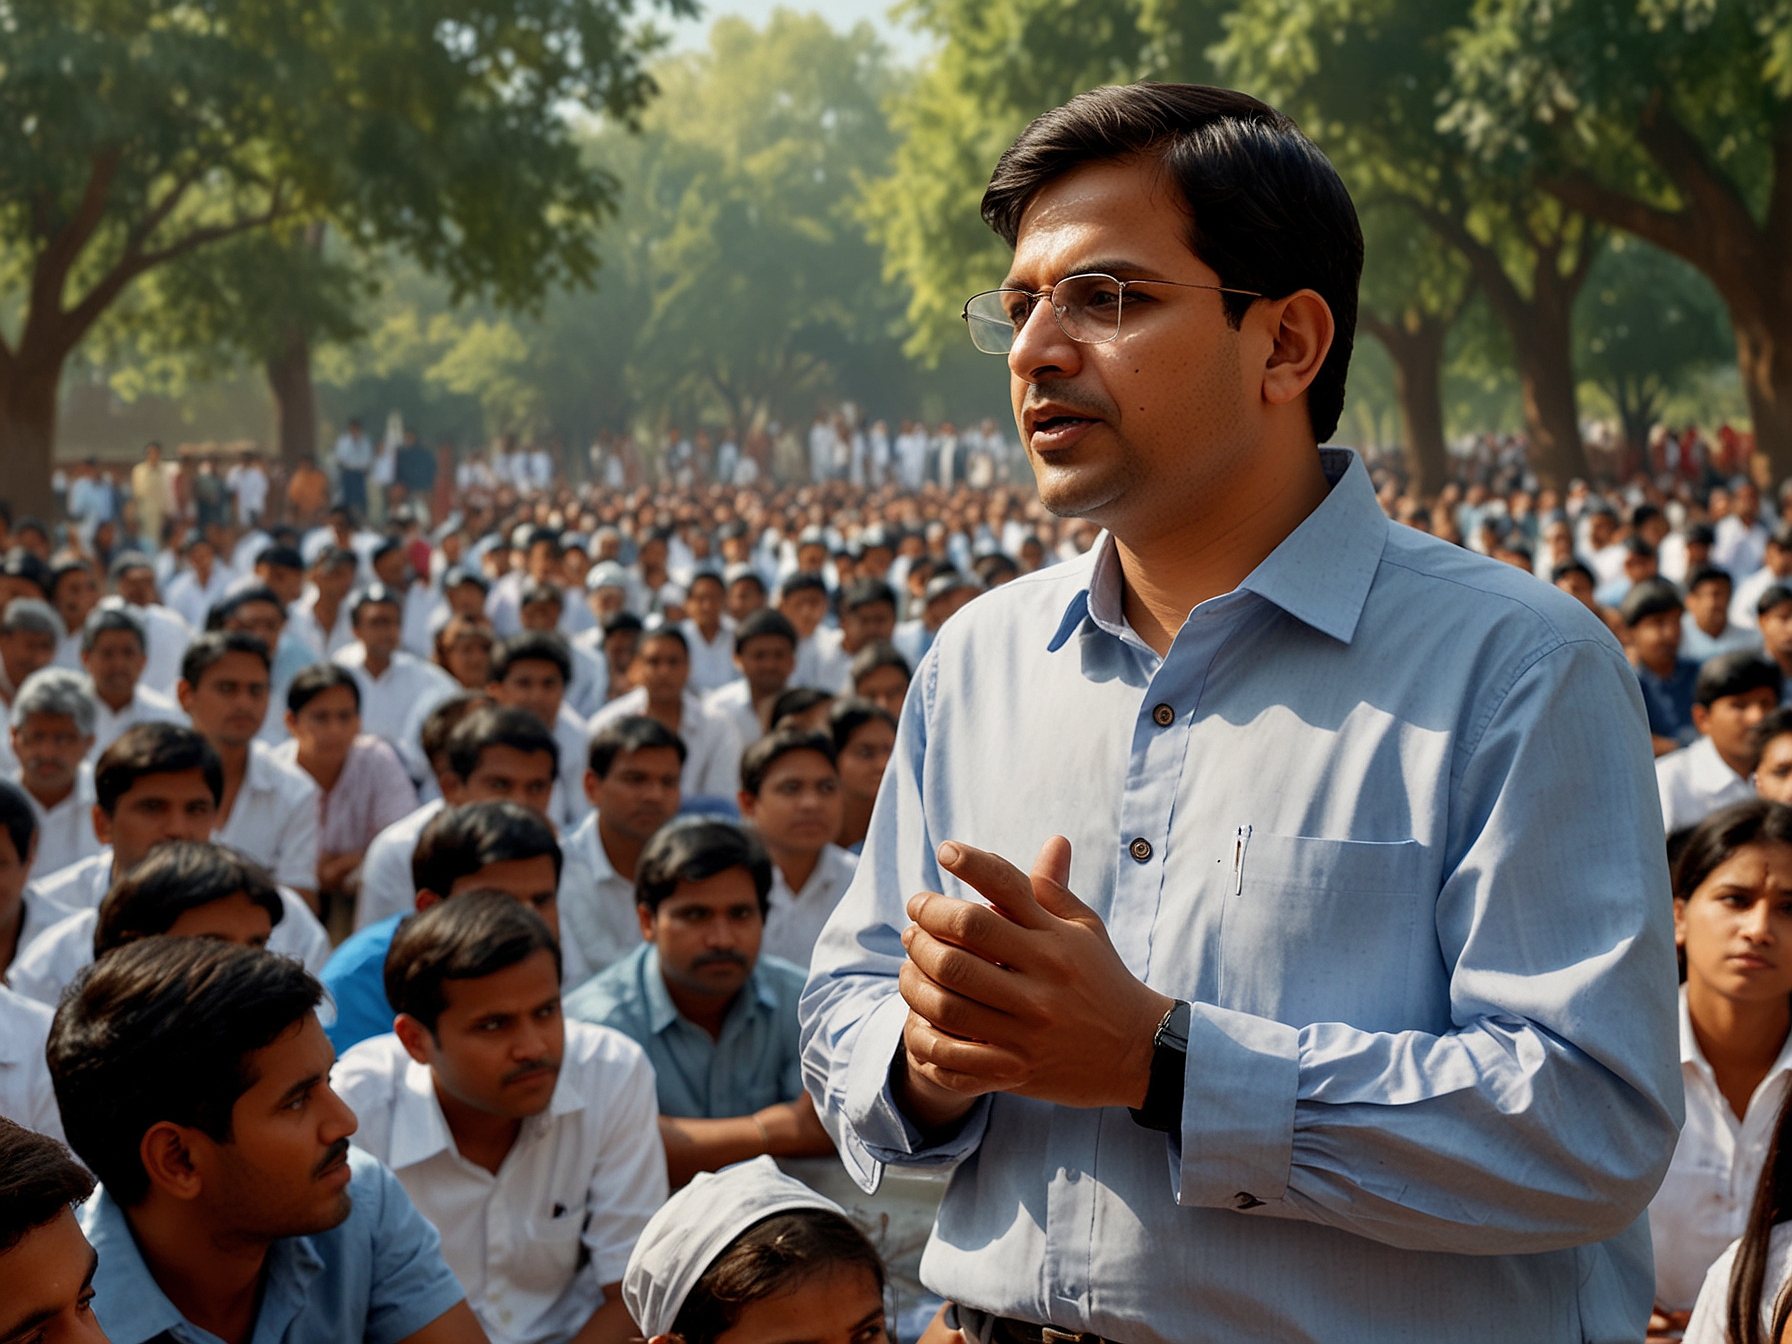 Sandeep Pathak, AAP's Rajya Sabha MP, addresses a crowd of concerned students and parents at Jantar Mantar, advocating for reforms and highlighting the challenges faced by NEET aspirants.